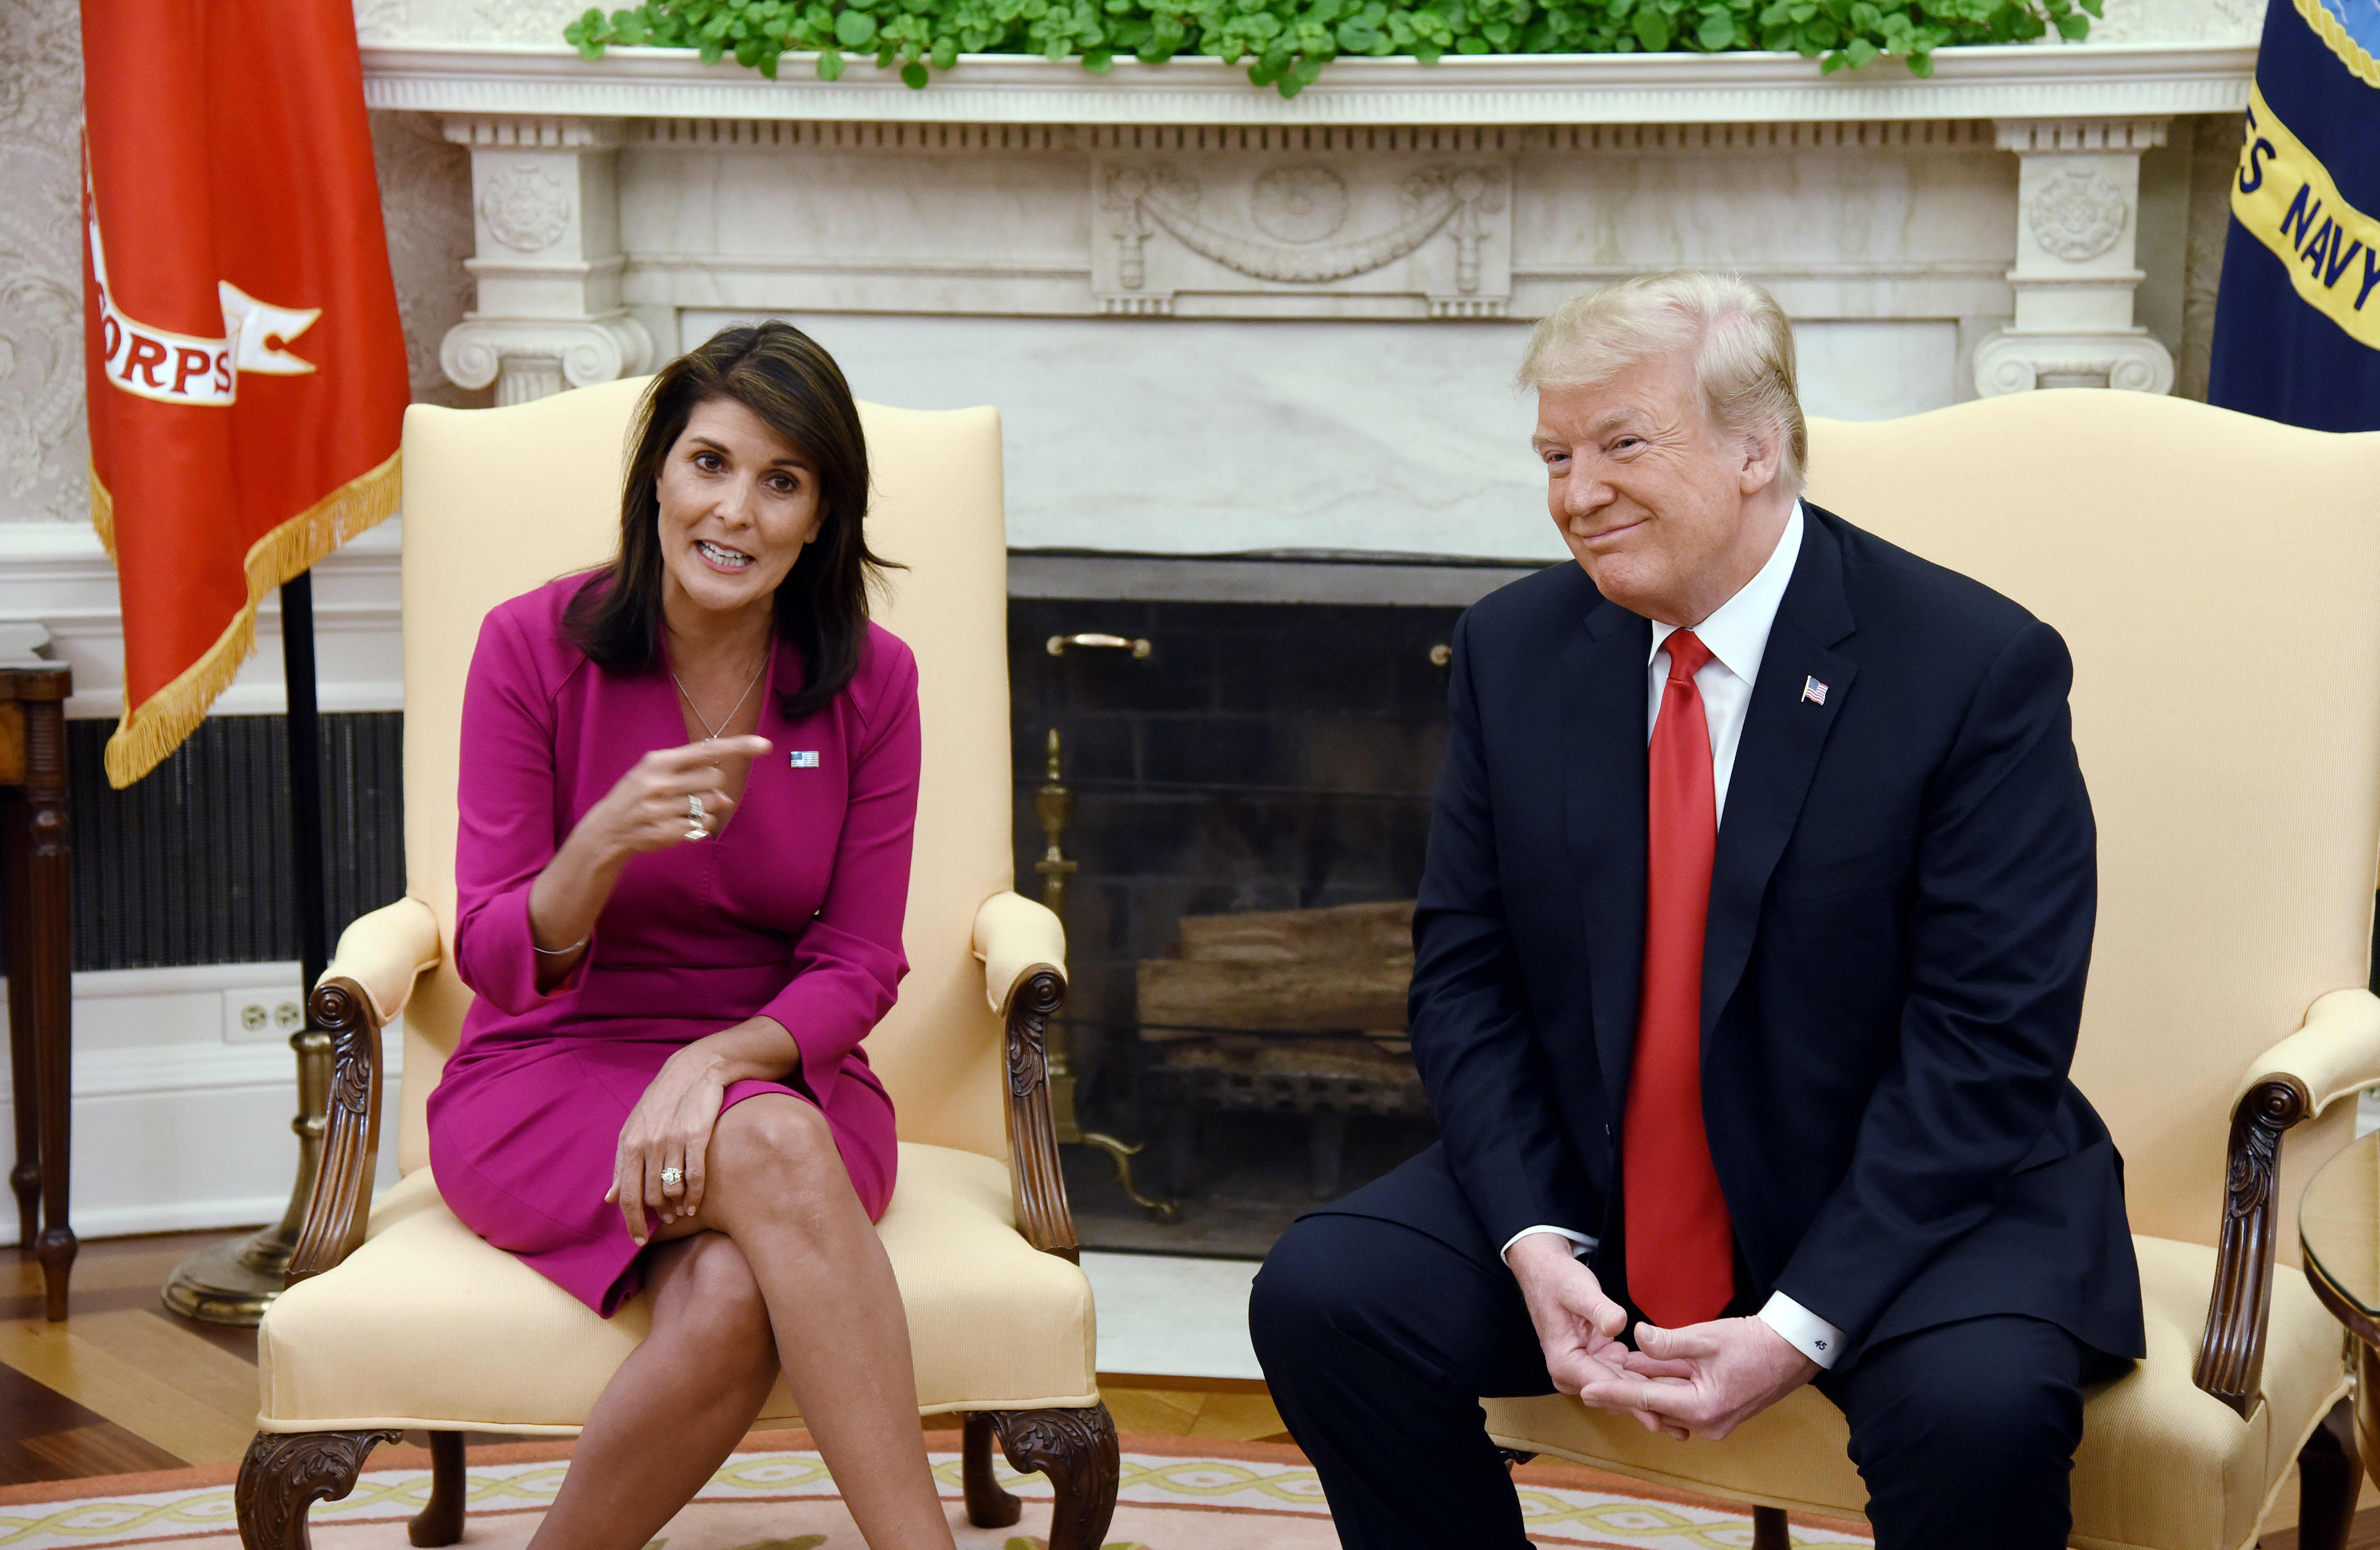 Nikki Haley just made herself the GOP front-runner to succeed Trump